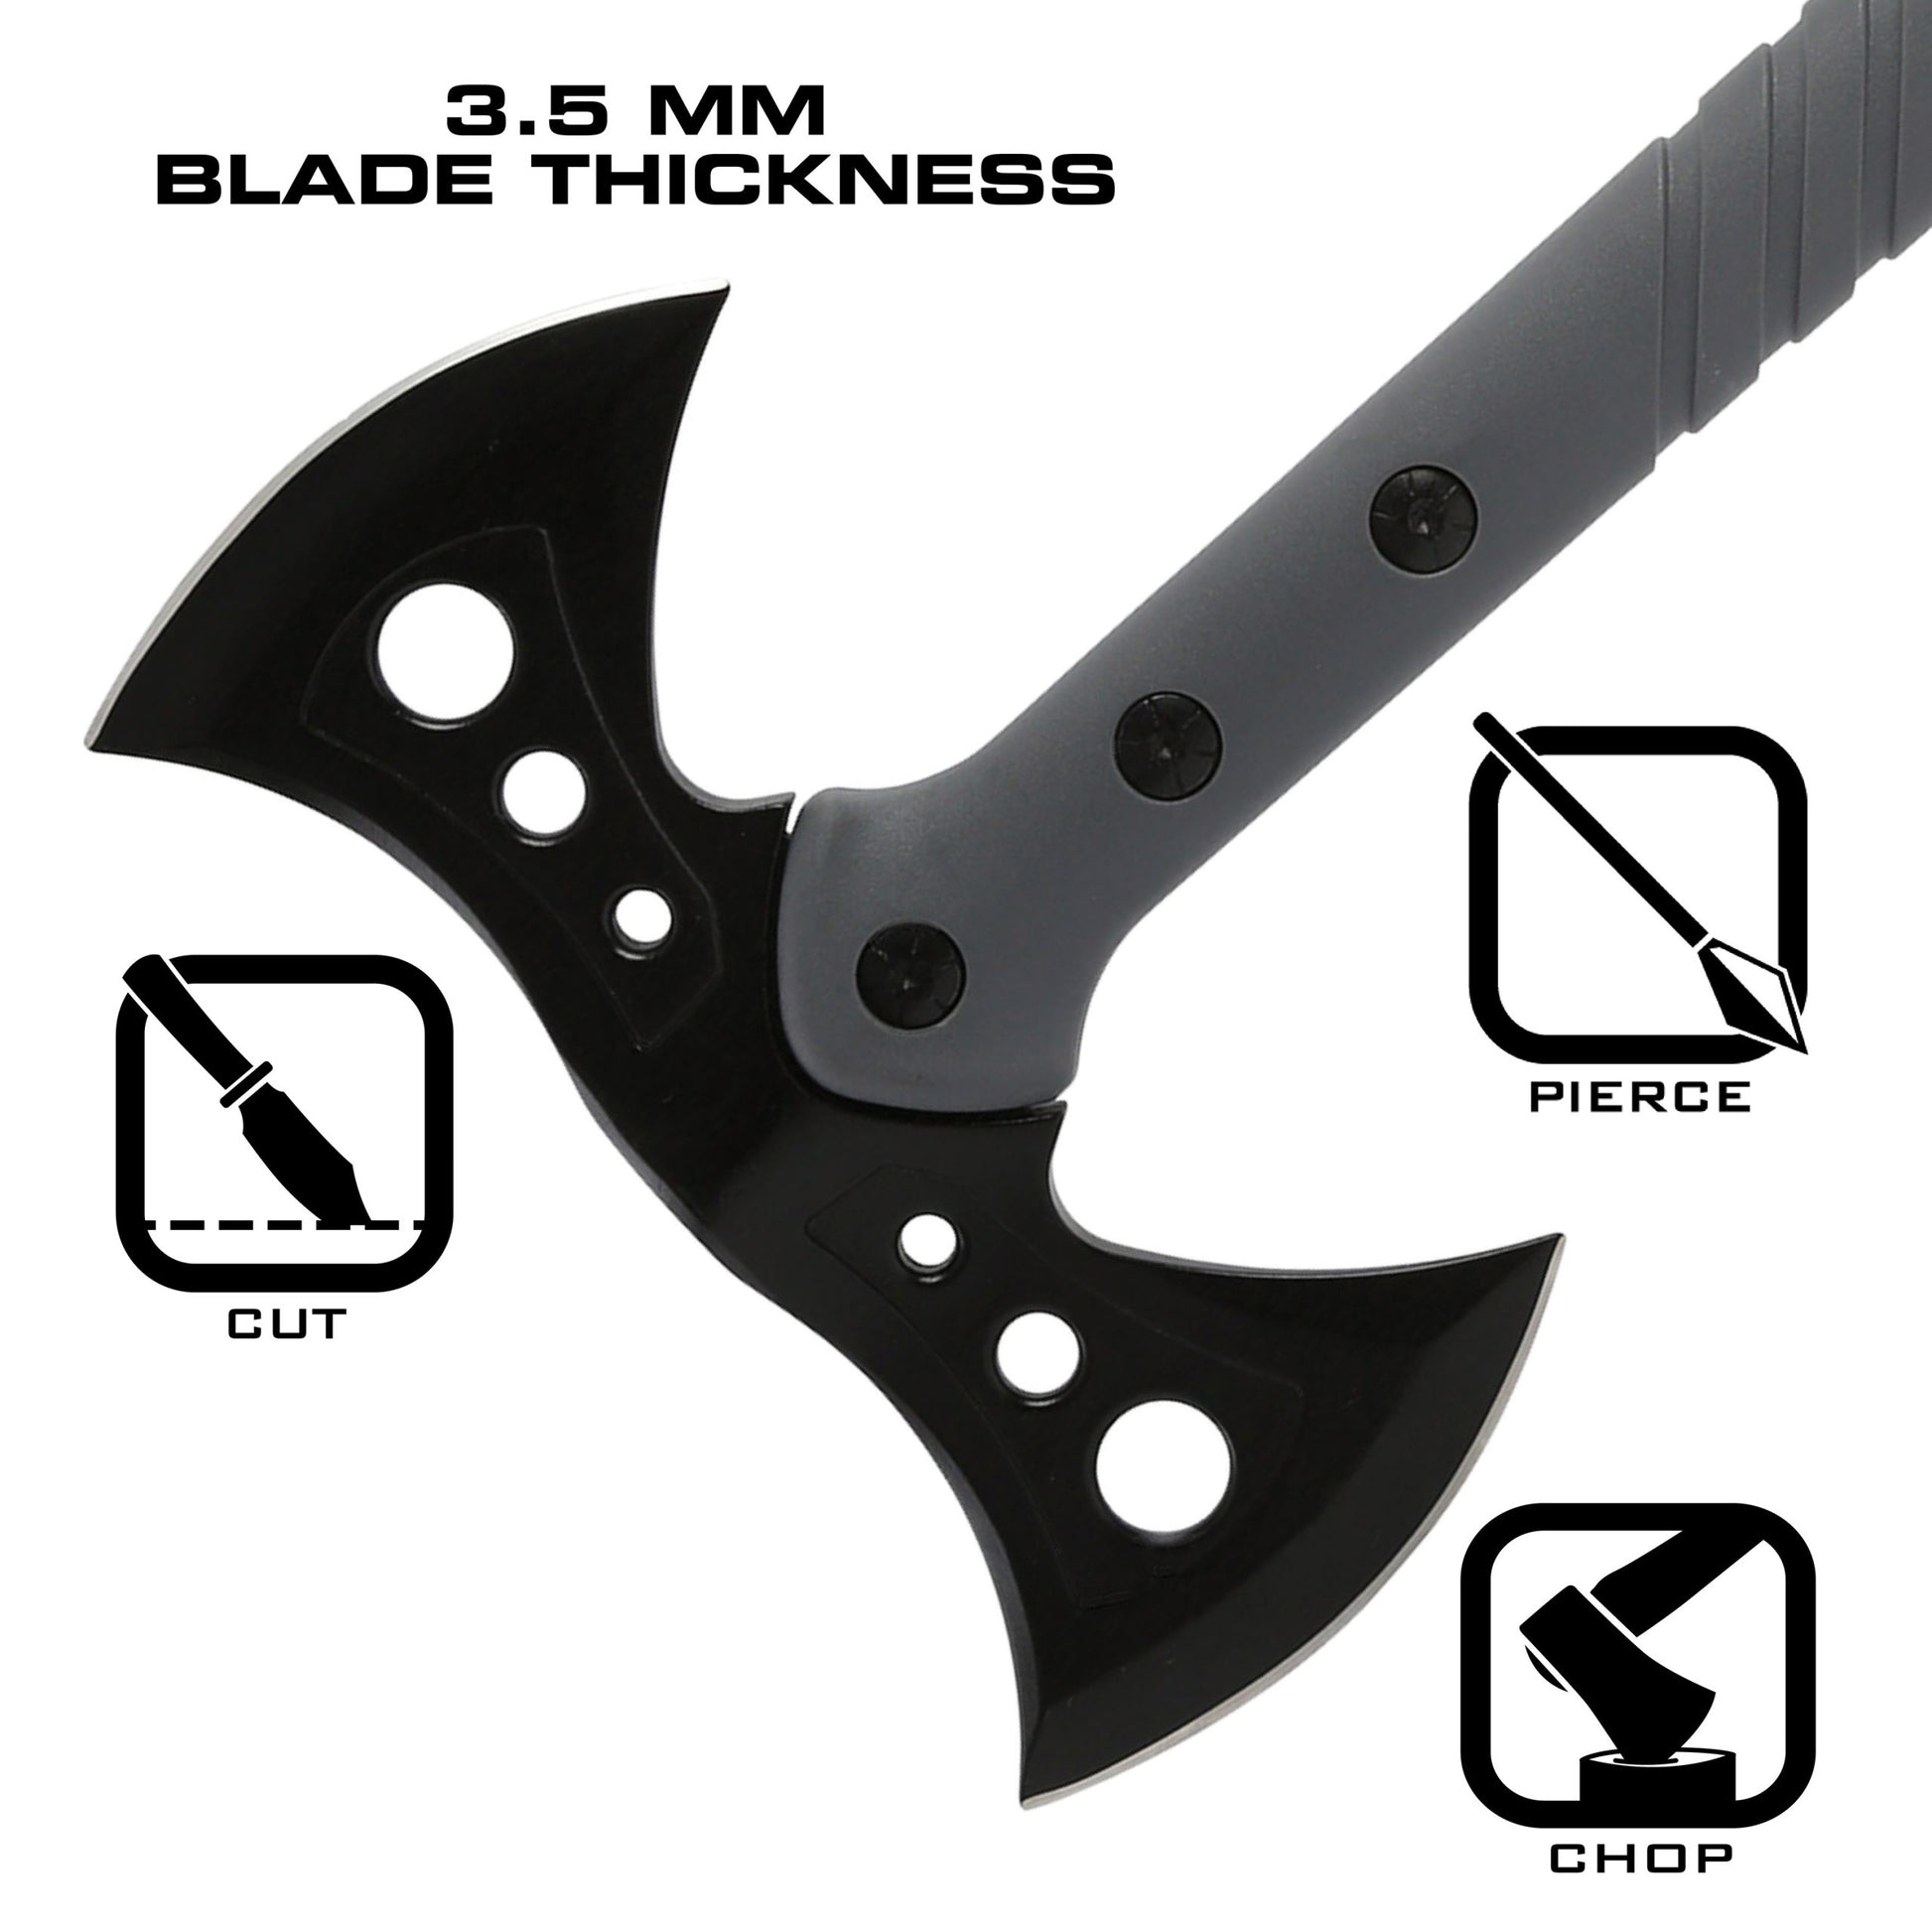 When you need a tactical survivalist axe that holds up to the rigors of any camping or hunting trips, the REAPR 11779 Sidewinder takes care of all your survivalist and hunting needs. www.defenceqstore.com.au